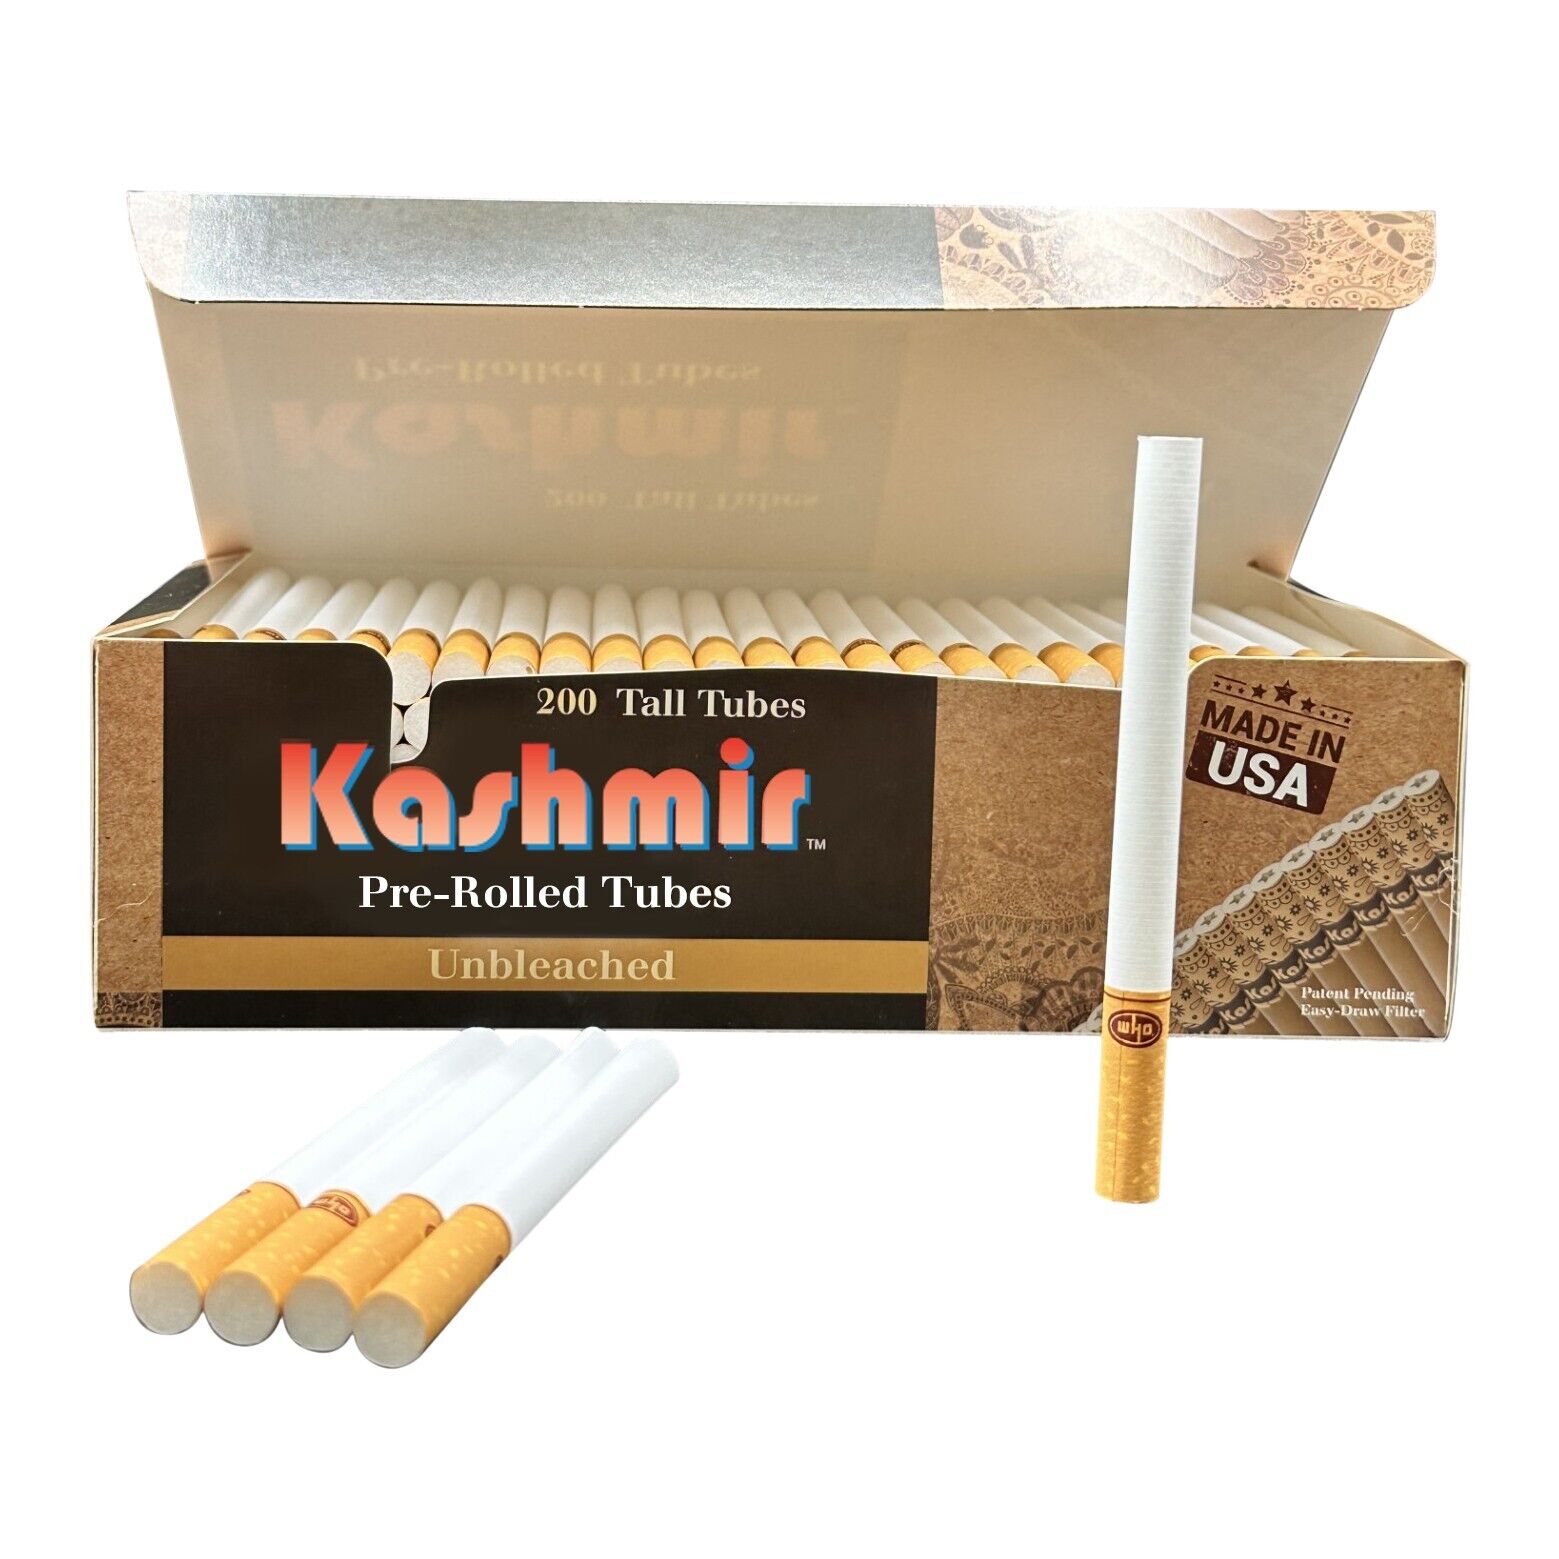 Kashmir Cigarette Filter Tubes 100mm Unbleached Pre Rolled Tall Tubes: 200 Count